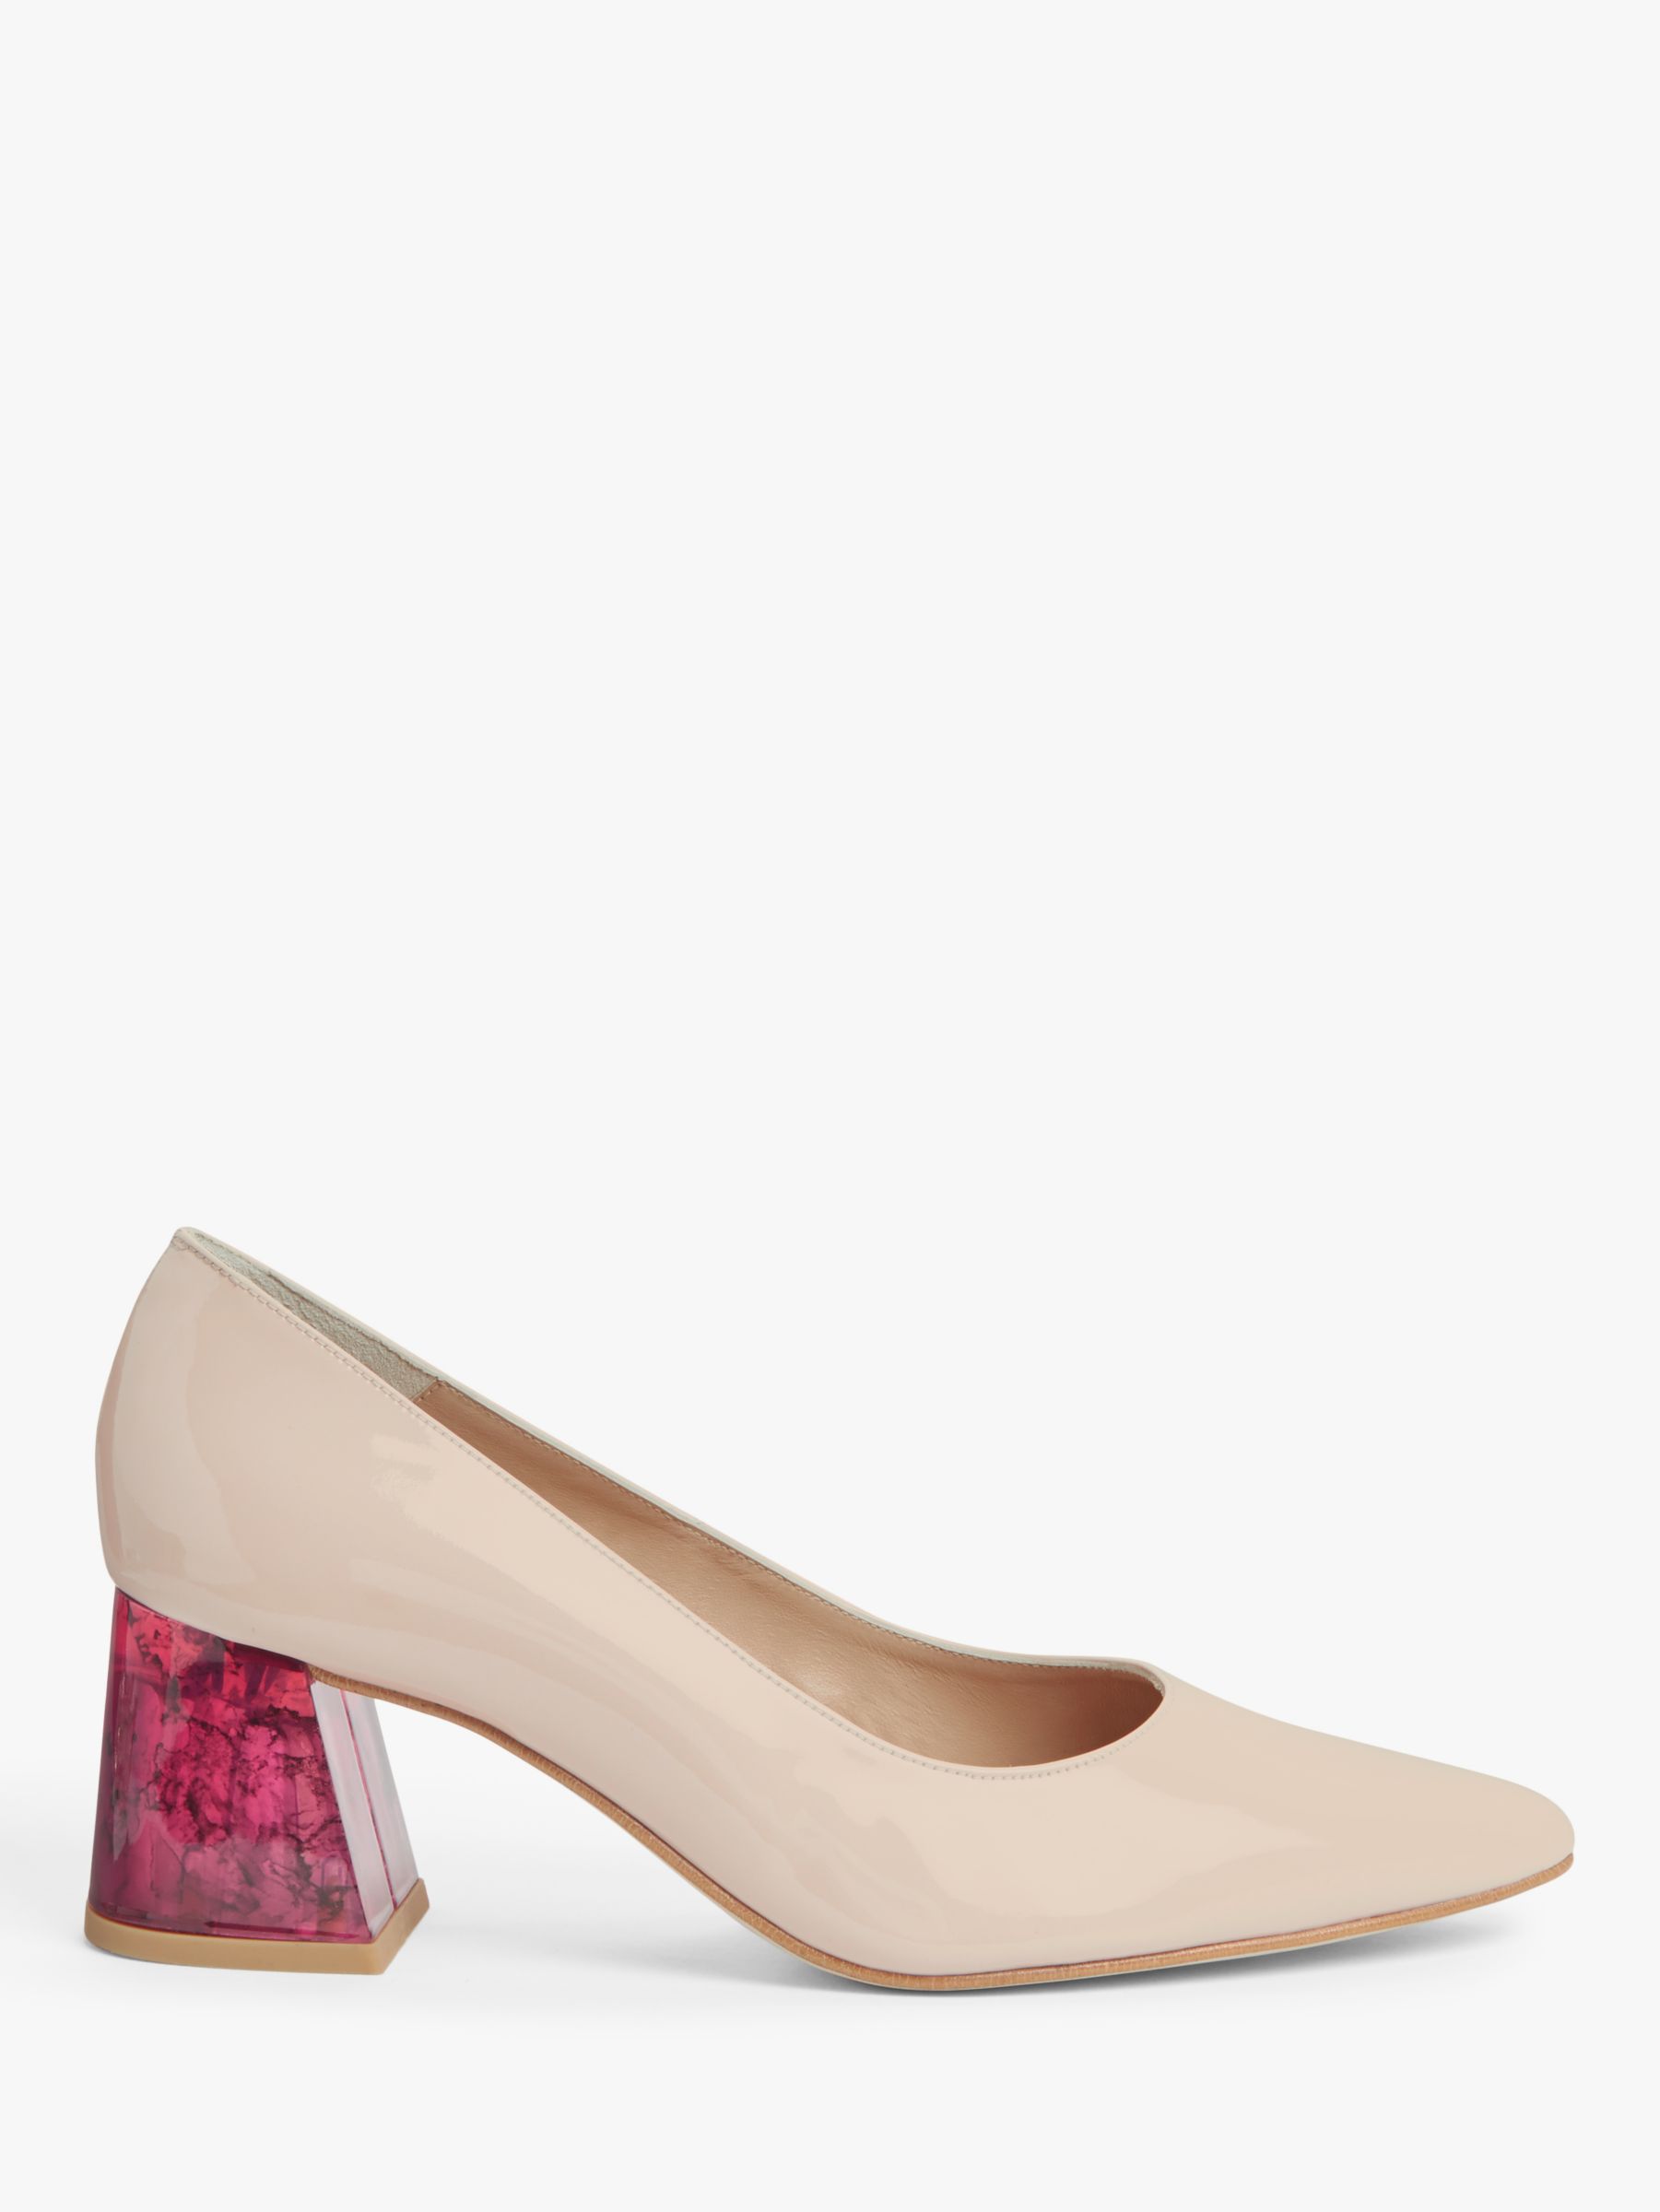 John Lewis & Partners Anastasia Feature Heel Pointed Court Shoes